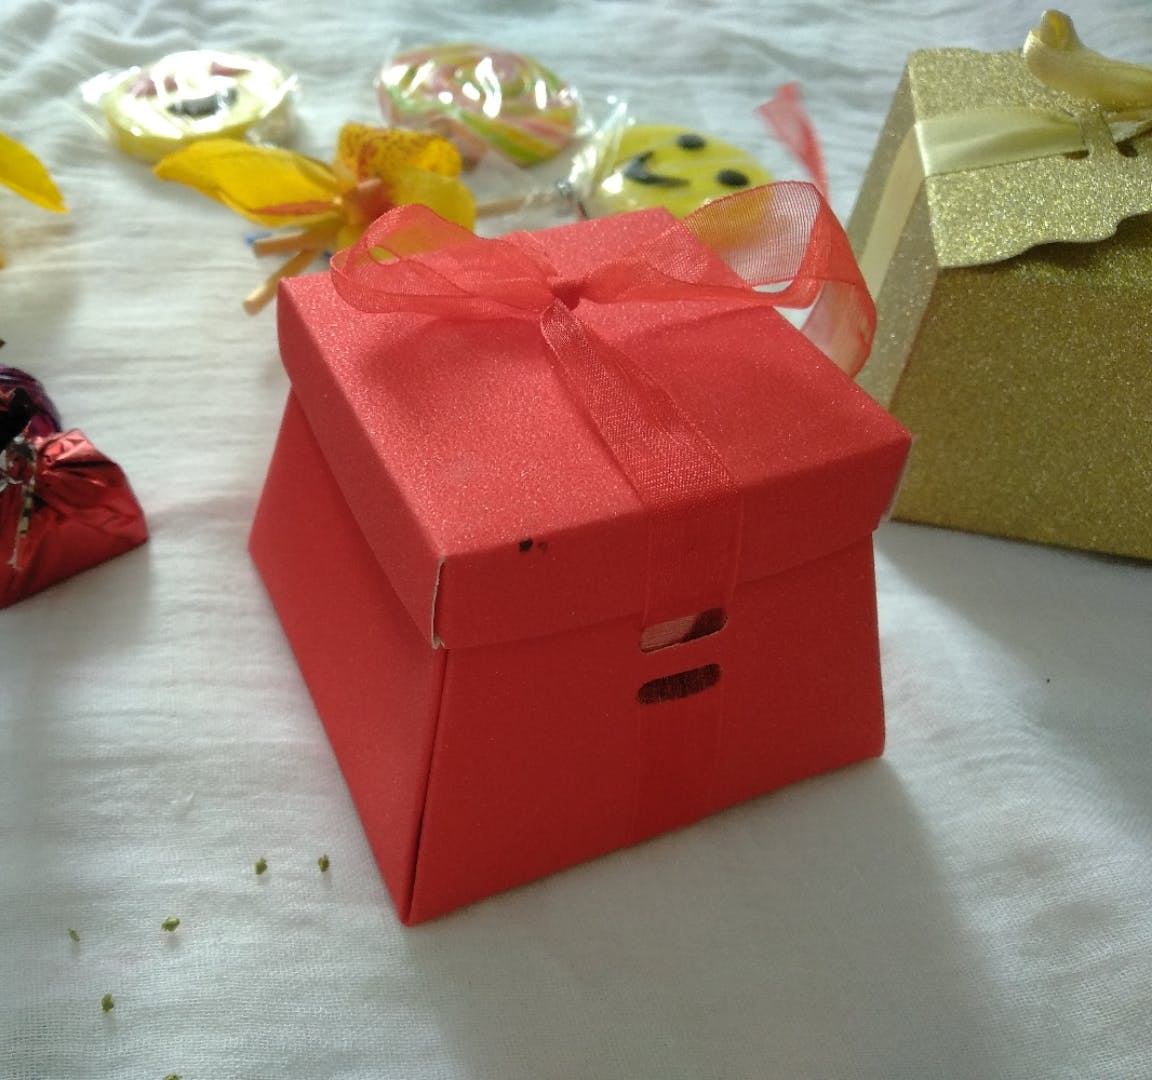 Red,Present,Box,Party favor,Gift wrapping,Wedding favors,Pink,Ribbon,Packaging and labeling,Carton